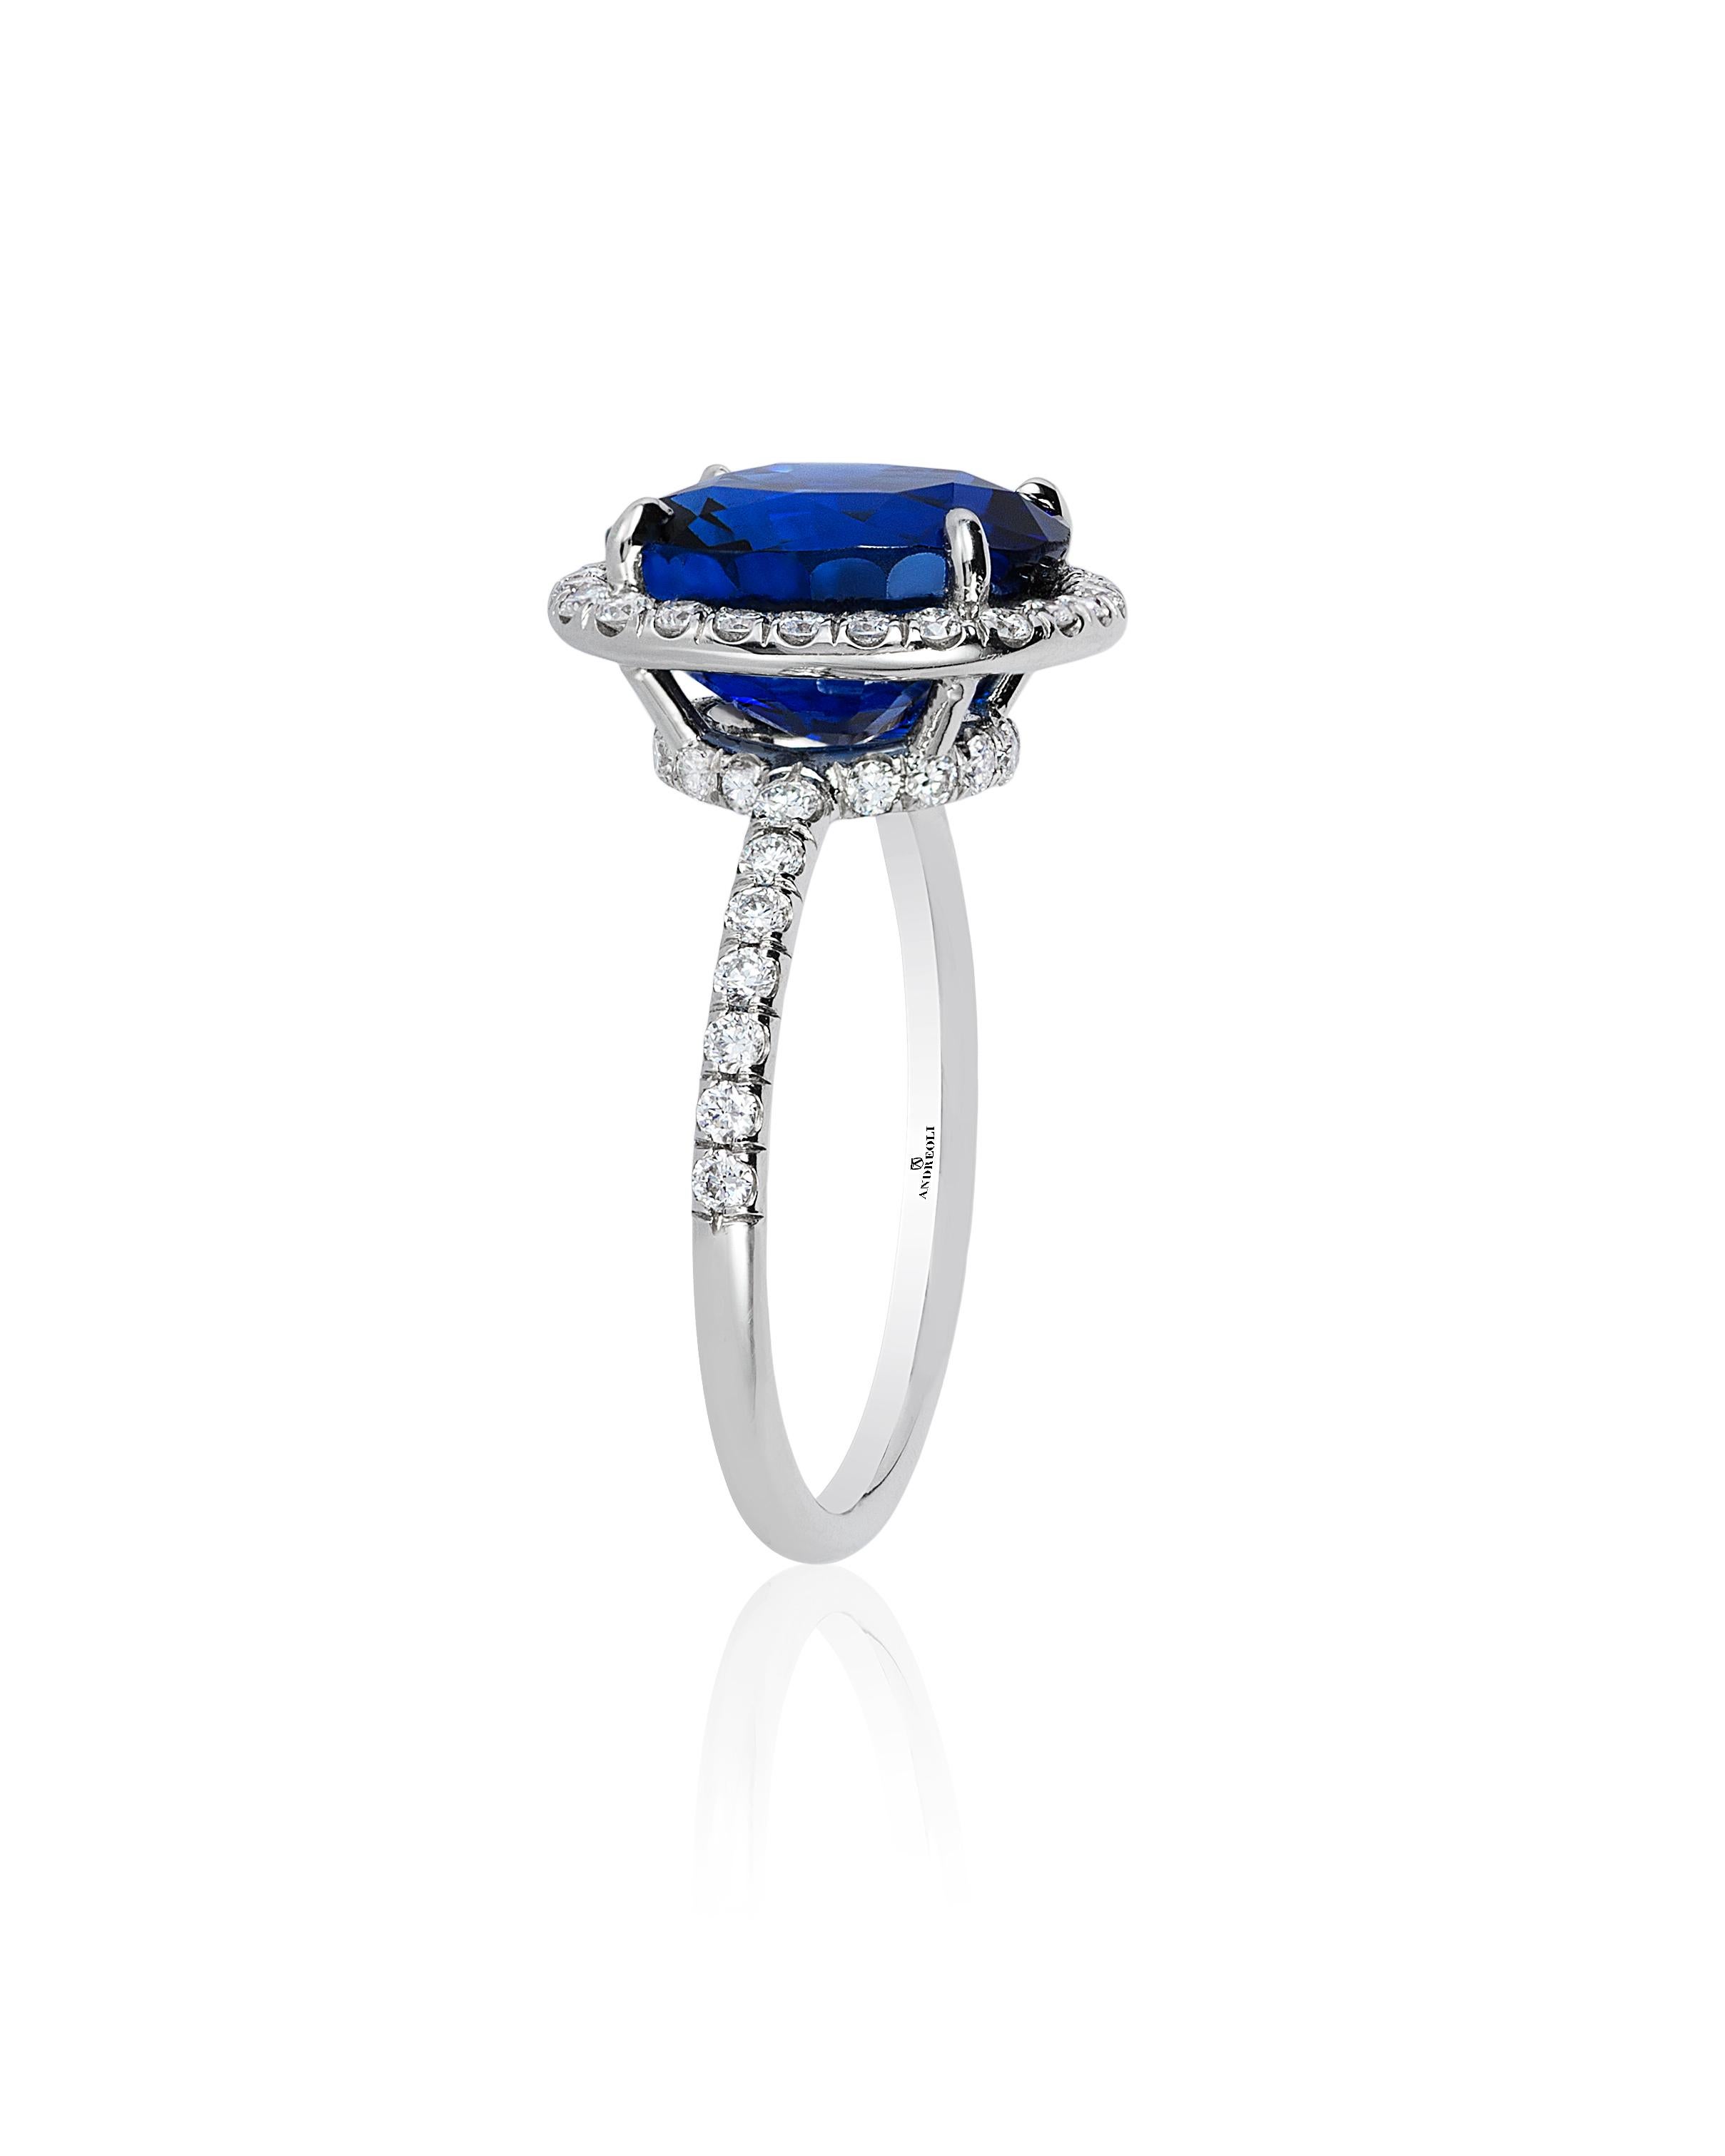 Andreoli CDC Certified 6.31 Carat Ceylon Blue Sapphire Diamond Platinum Ring. This ring features a 6.31 carat vivid blue cushion Ceylon blue sapphire certified by C. Dunaigre Consulting Switzerland surrounded with 0.56 carats of round brilliant